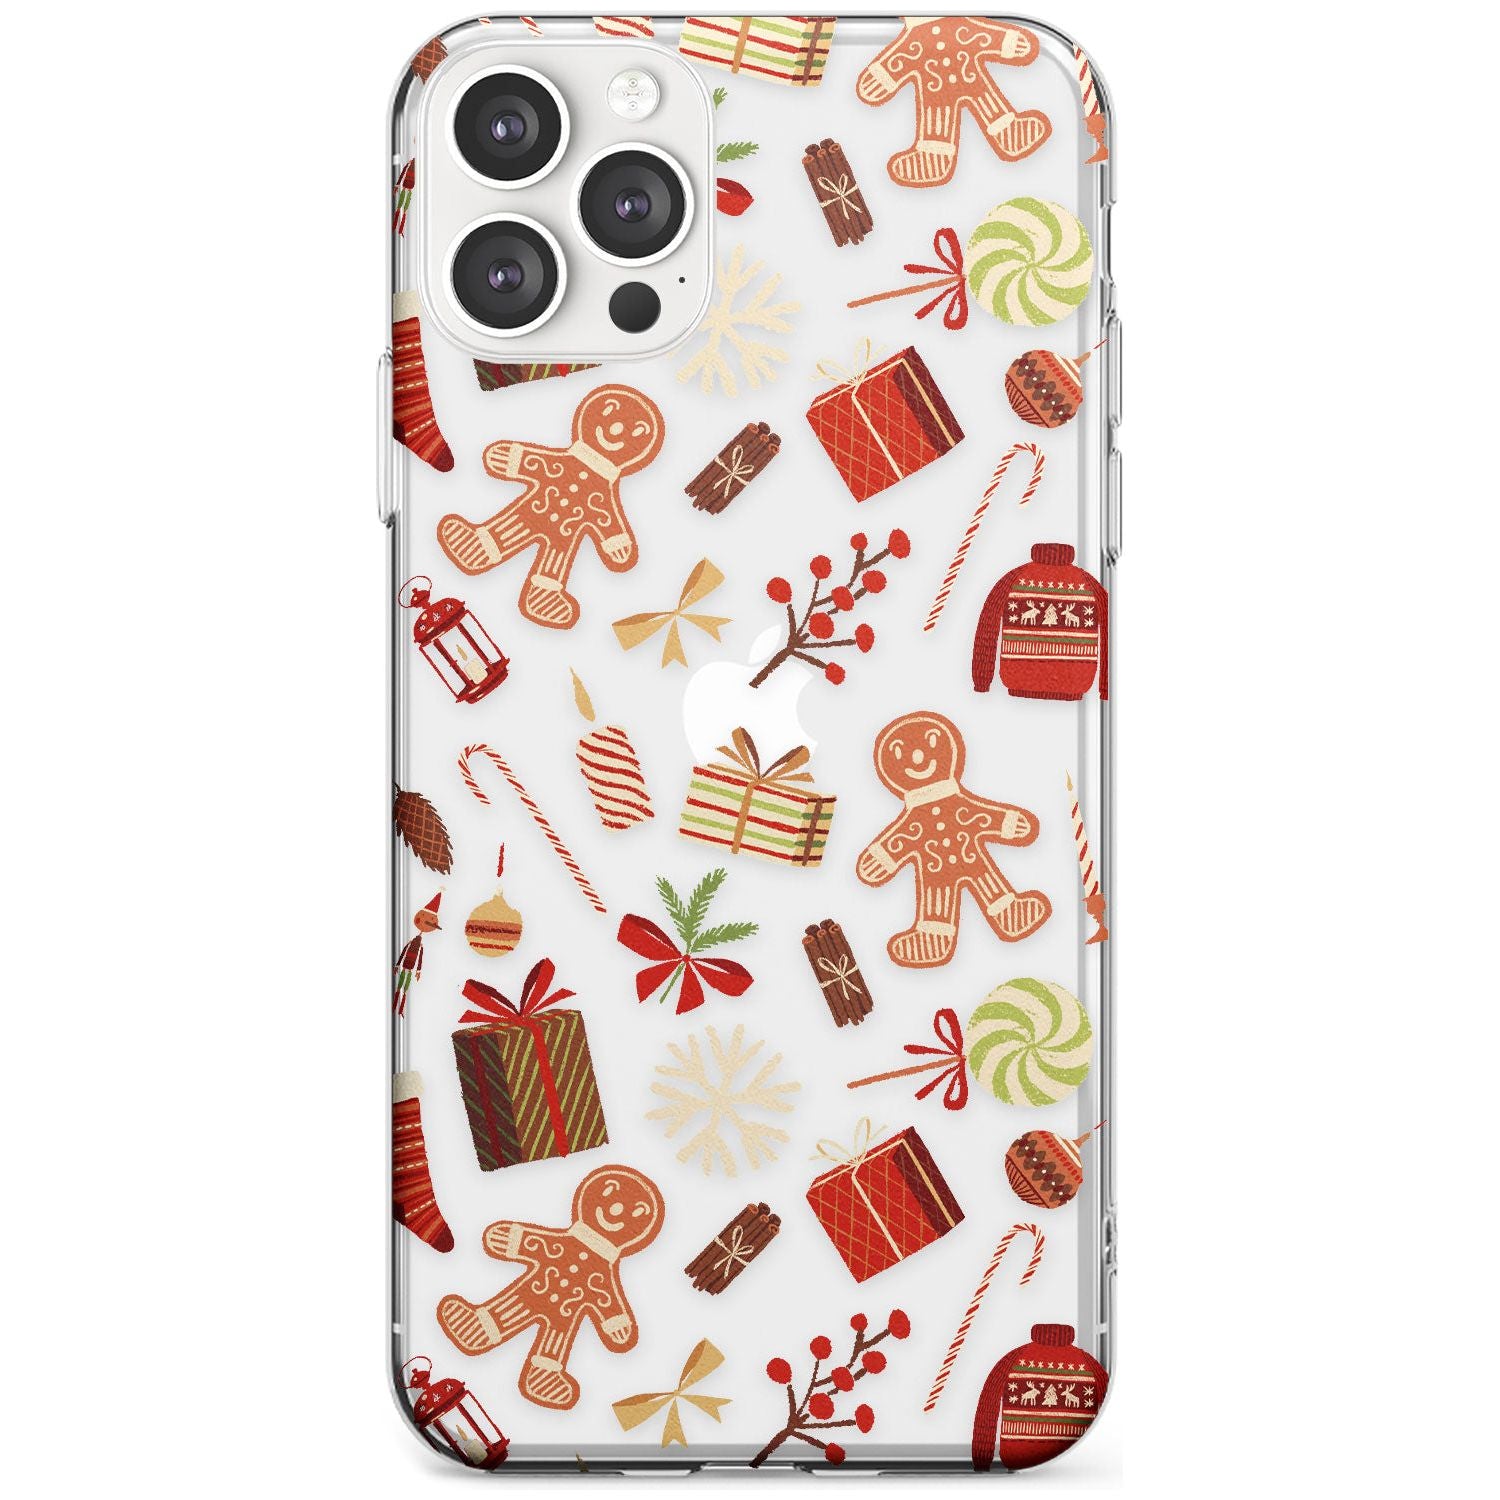 Christmas Assortments Slim TPU Phone Case for iPhone 11 Pro Max